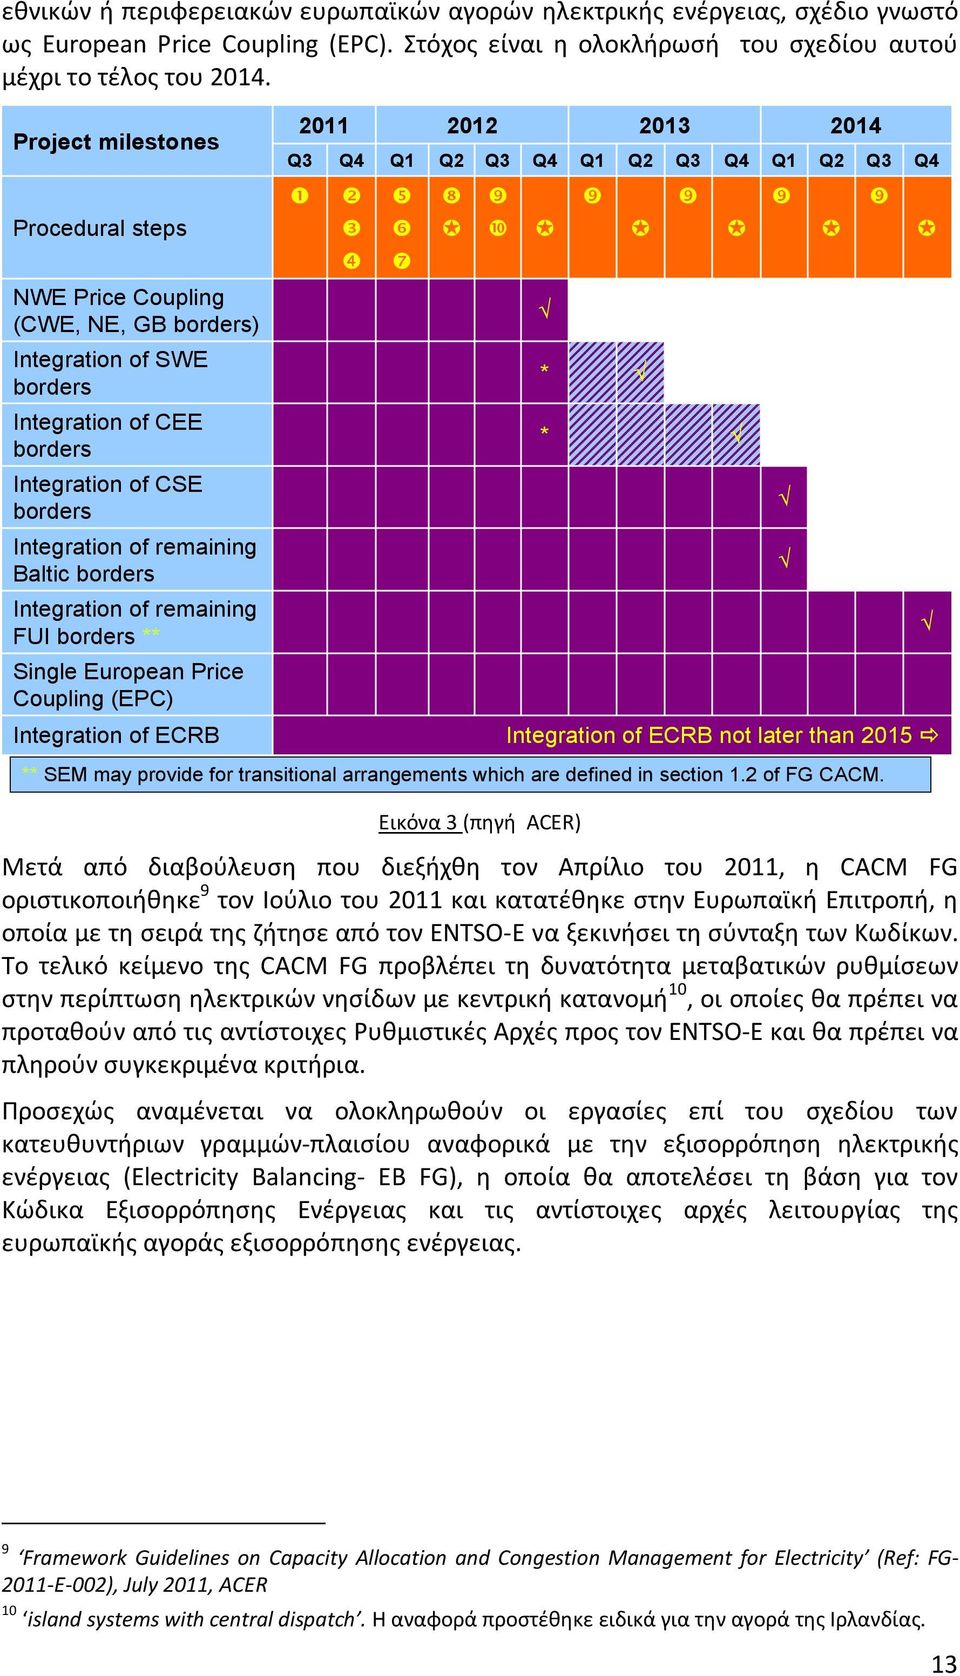 Integration of remaining FUI borders ** Single European Price Coupling (EPC) Integration of ECRB 2011 2012 2013 2014 Q3 Q4 Q1 Q2 Q3 Q4 Q1 Q2 Q3 Q4 Q1 Q2 Q3 Q4 * * Integration of ECRB not later than